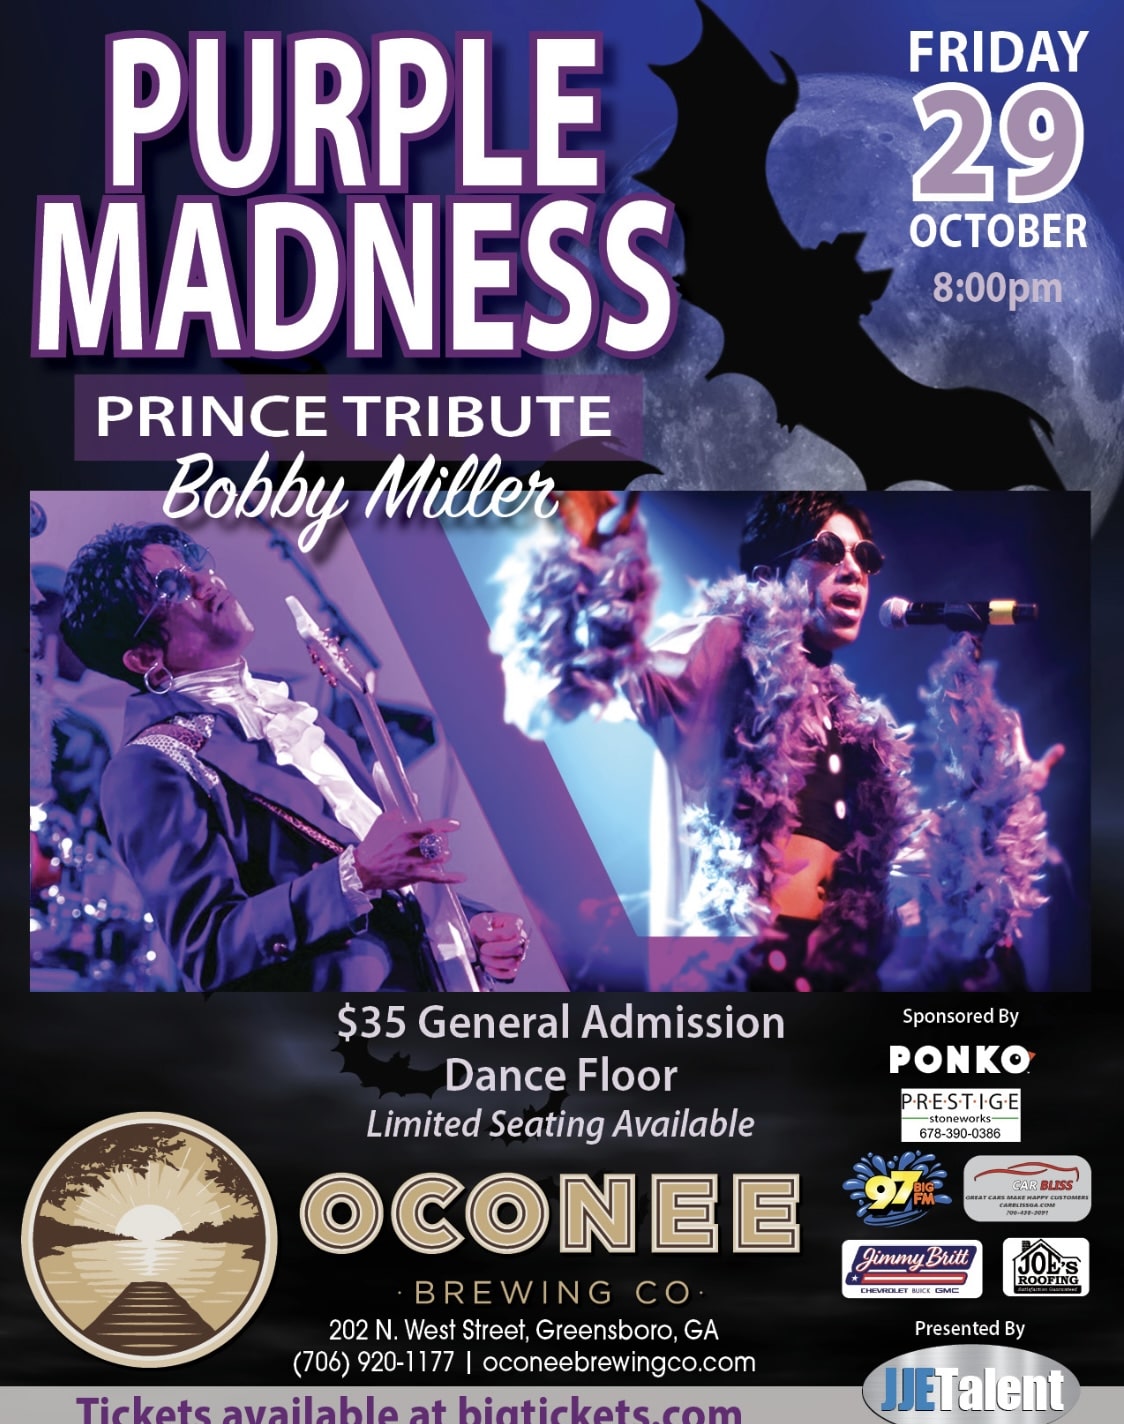 Prince Tribute flyer